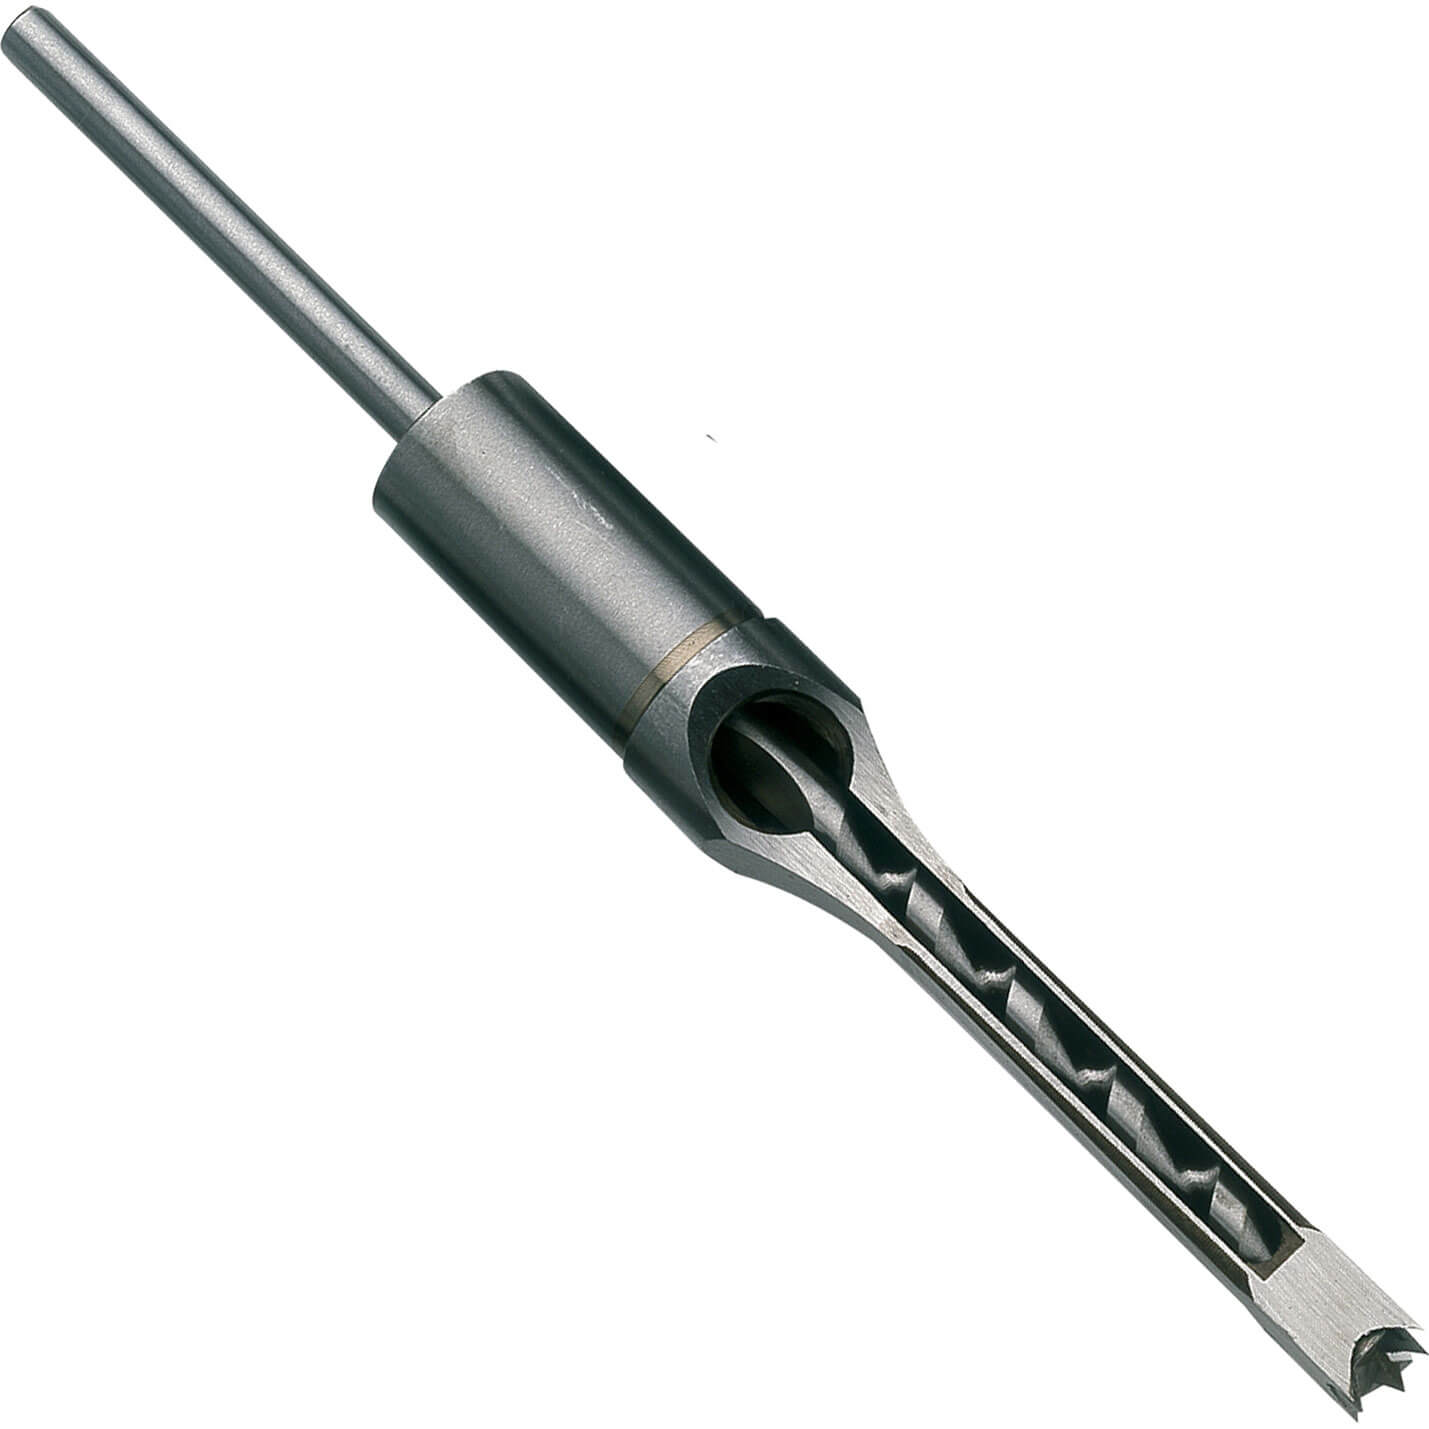 Image of Record Power Mortice Chisel and Bit 1/4"